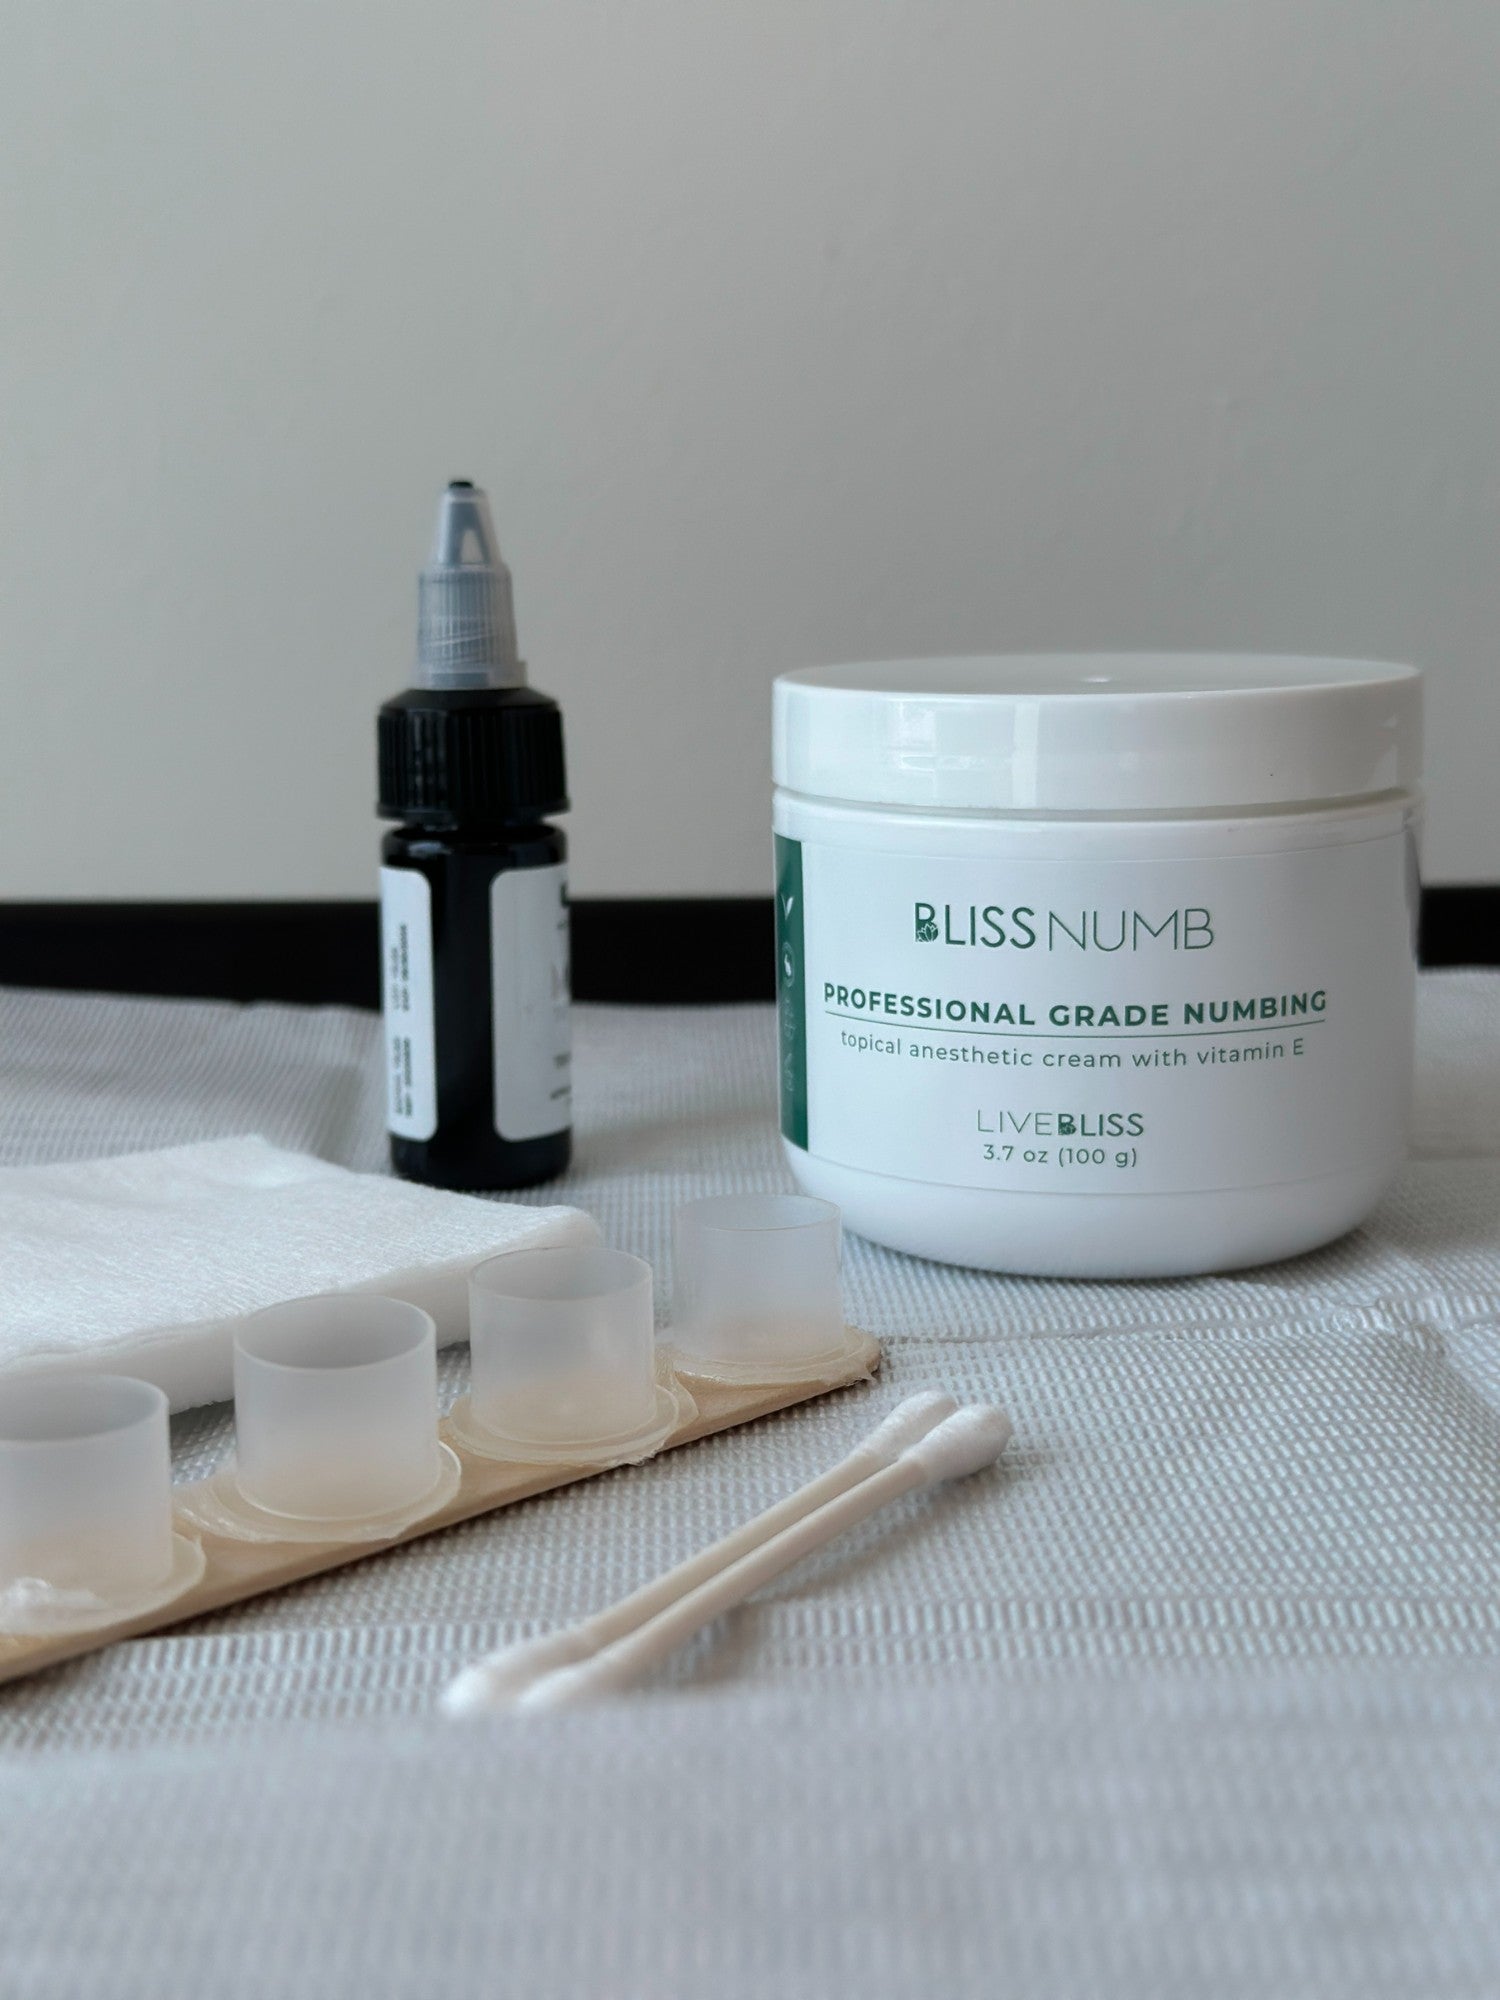 Bliss Numb, Topical Anesthetic Cream, Topical Anesthetic, Numbing Cream, Permanent Makeup Numbing, Permanent Makeup Topical Anesthetic